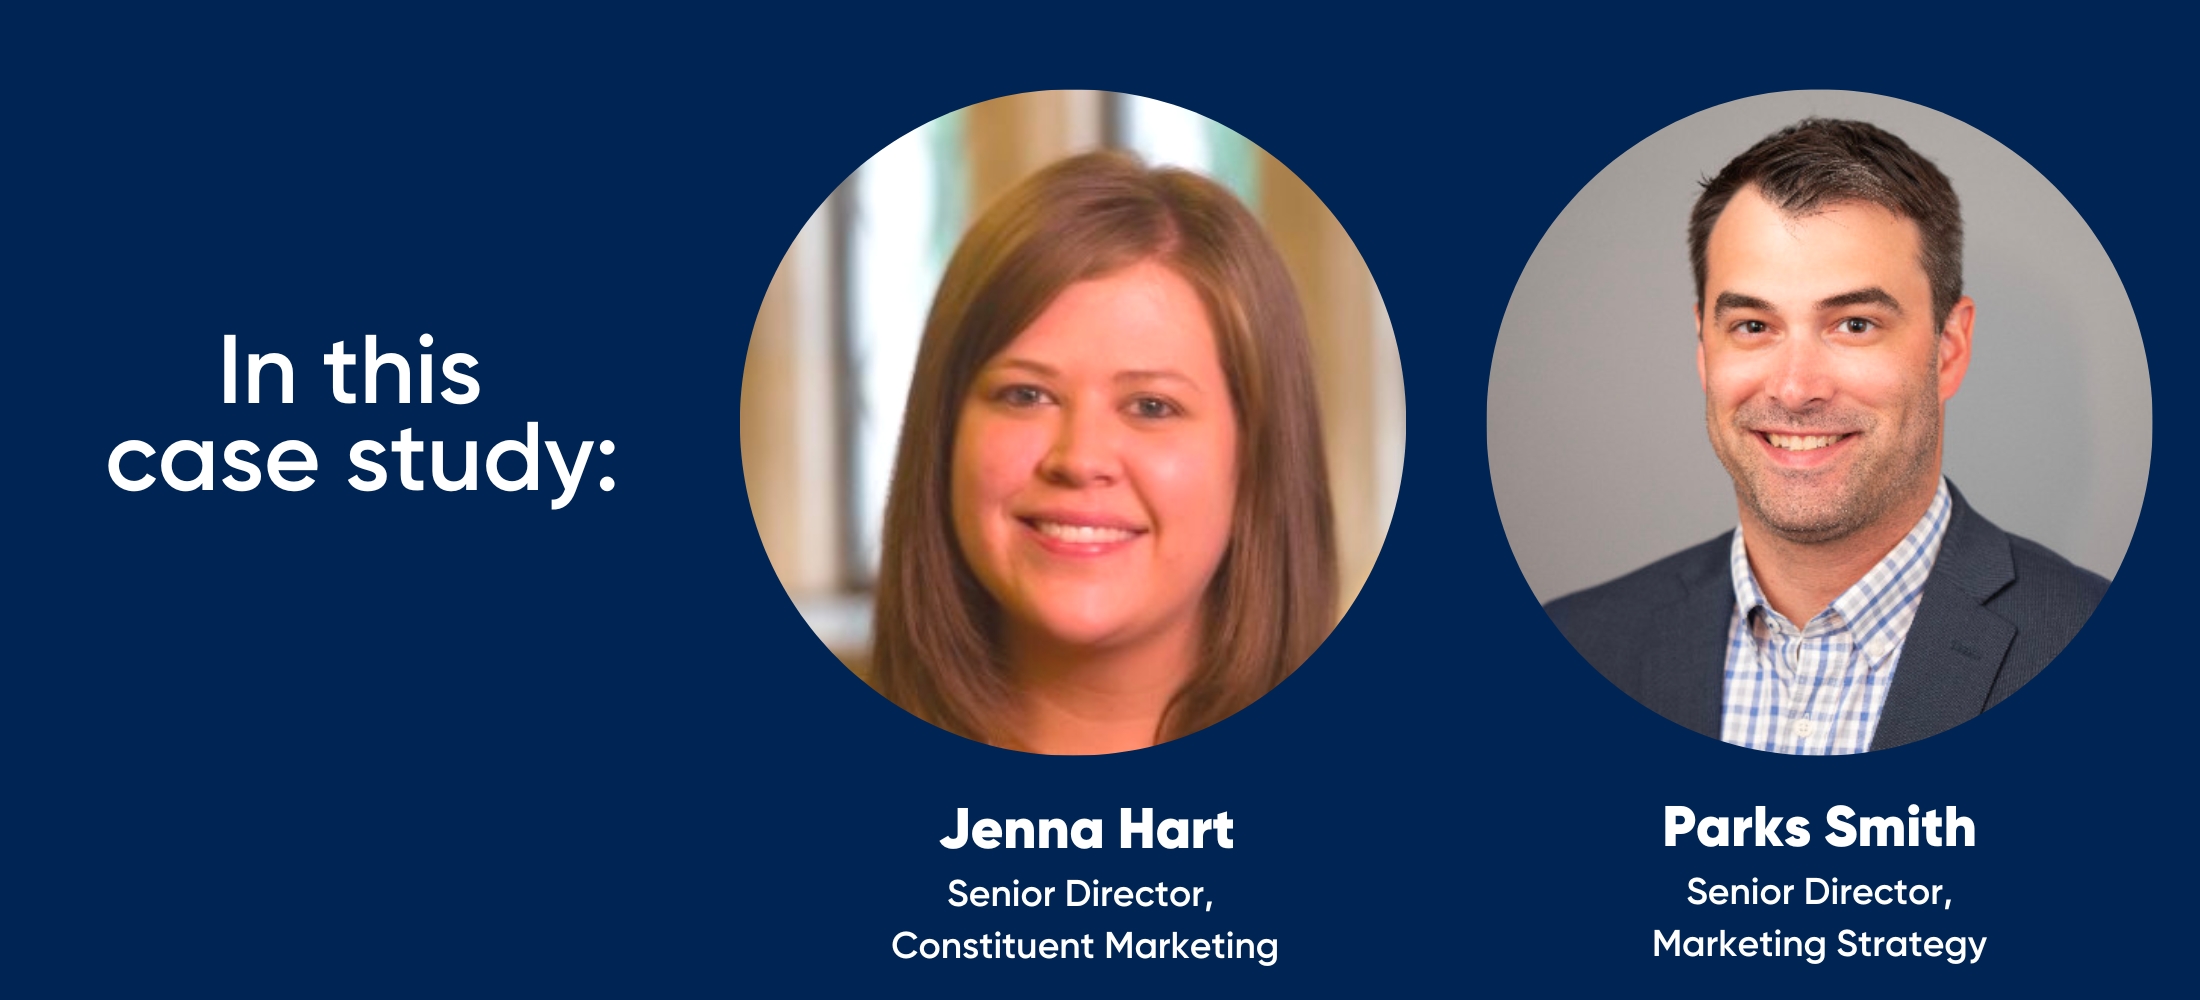 in this case study: Jenna Hart - Senior Director, Constituent Marketing and Parks Smith — Senior Director, Marketing Strategy